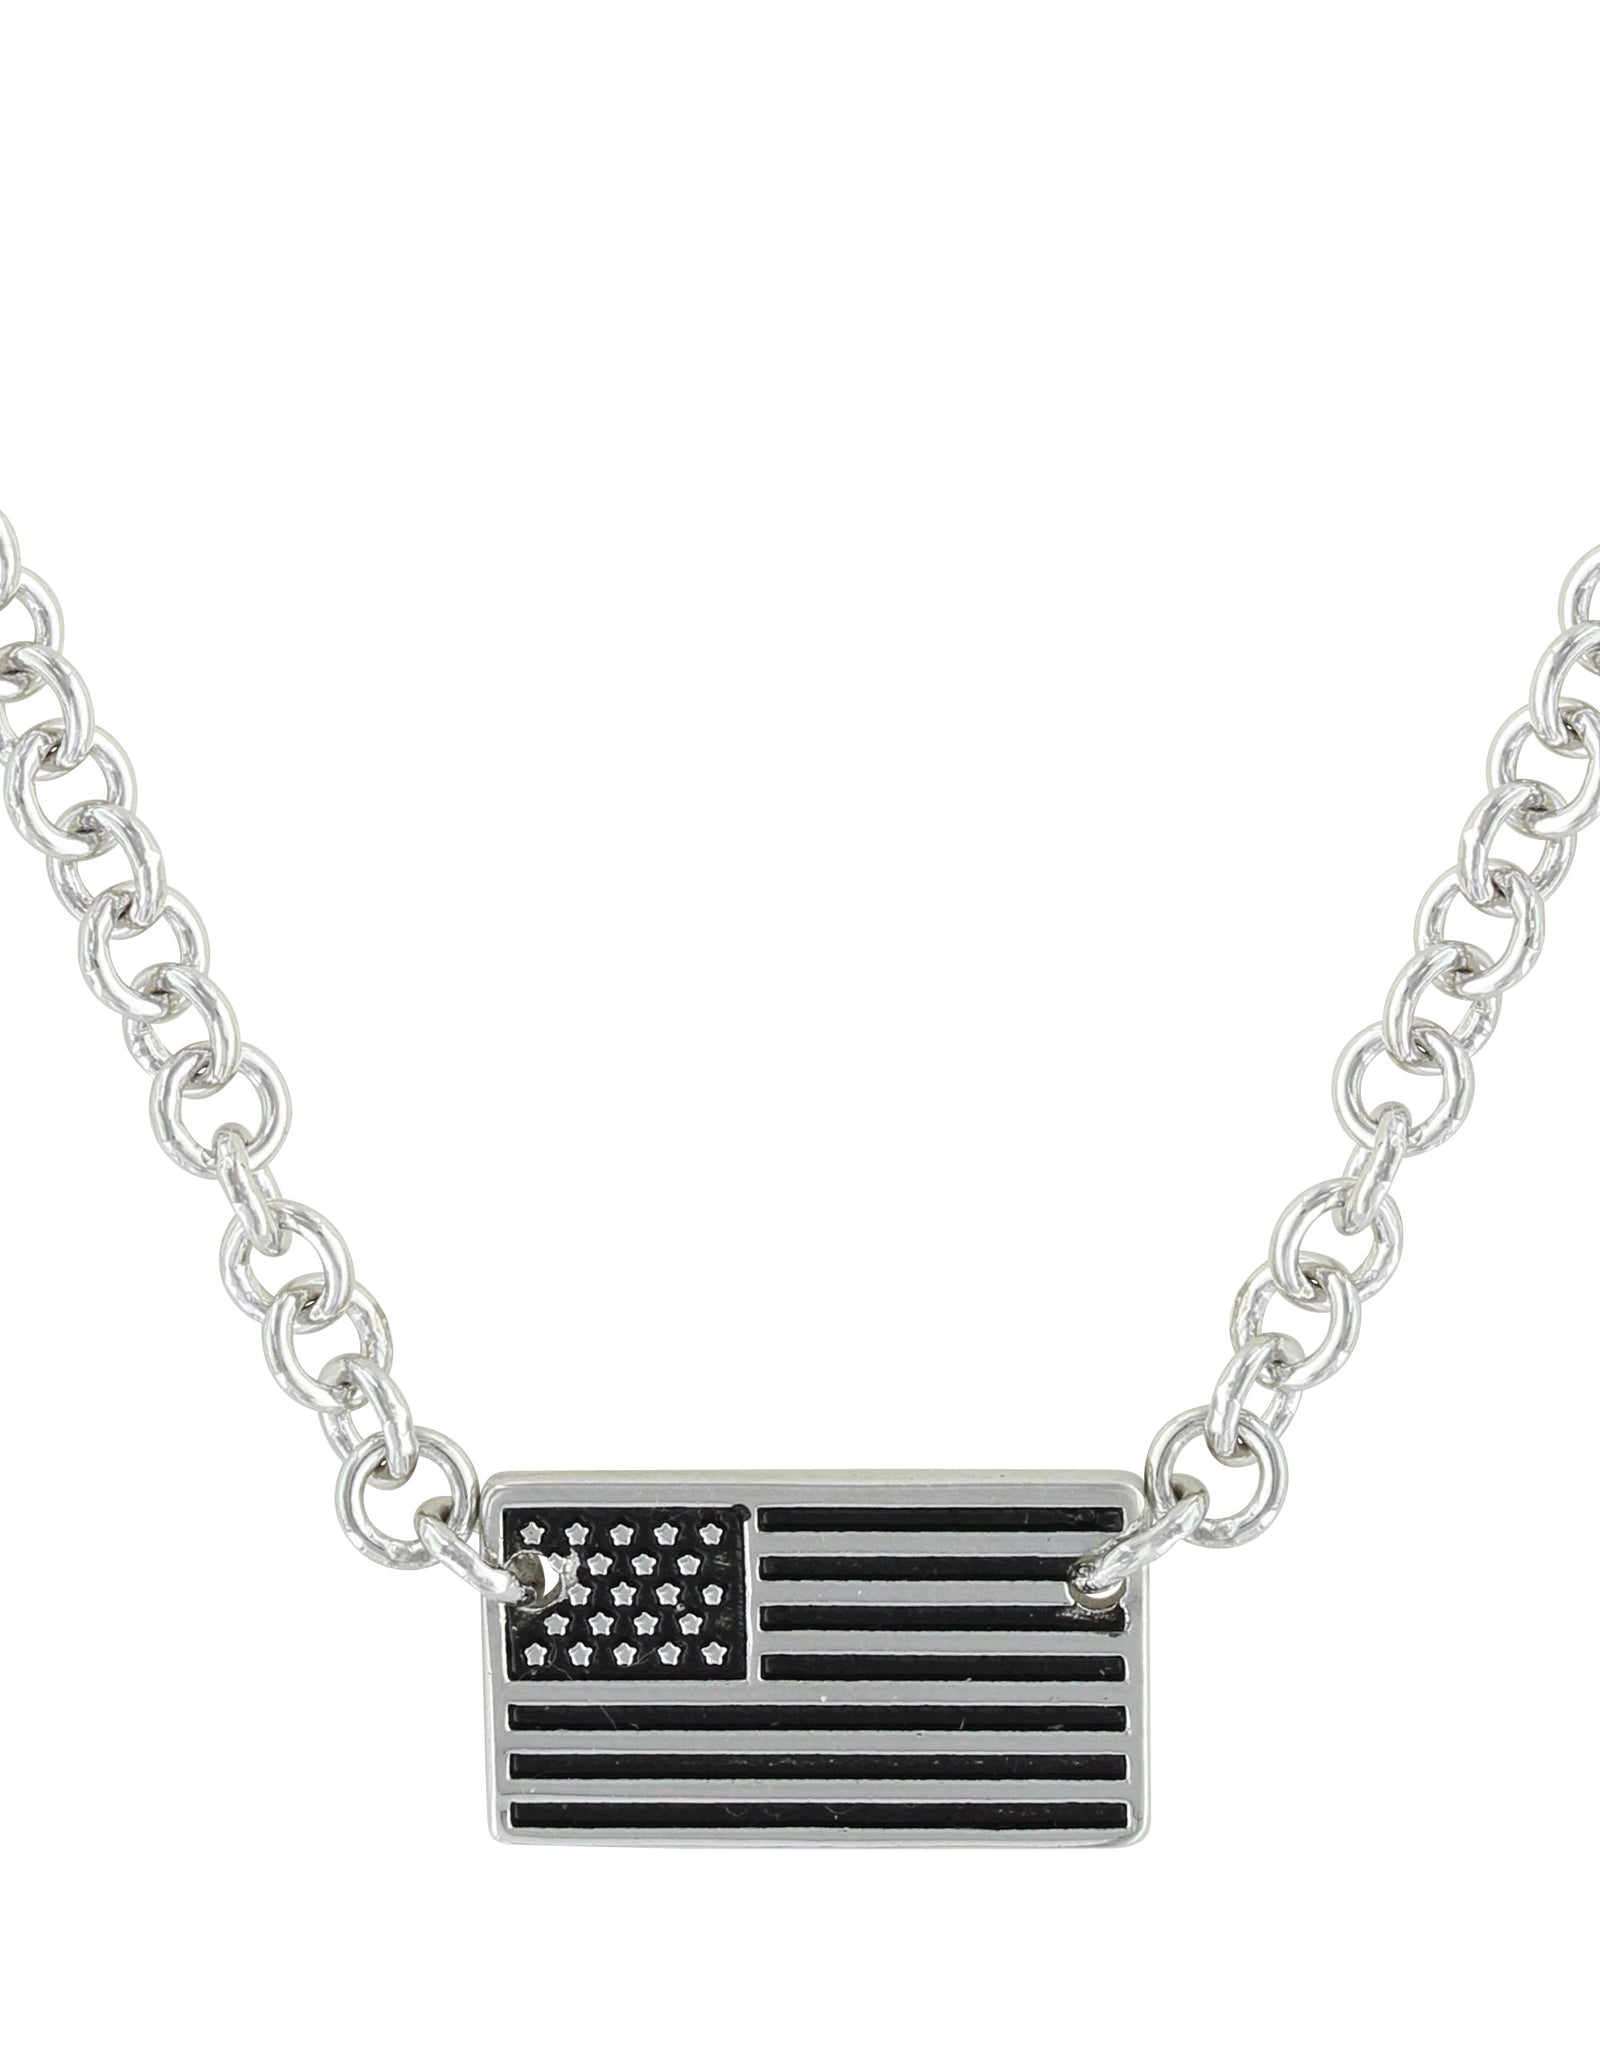 Freedom Isn't Free Necklace